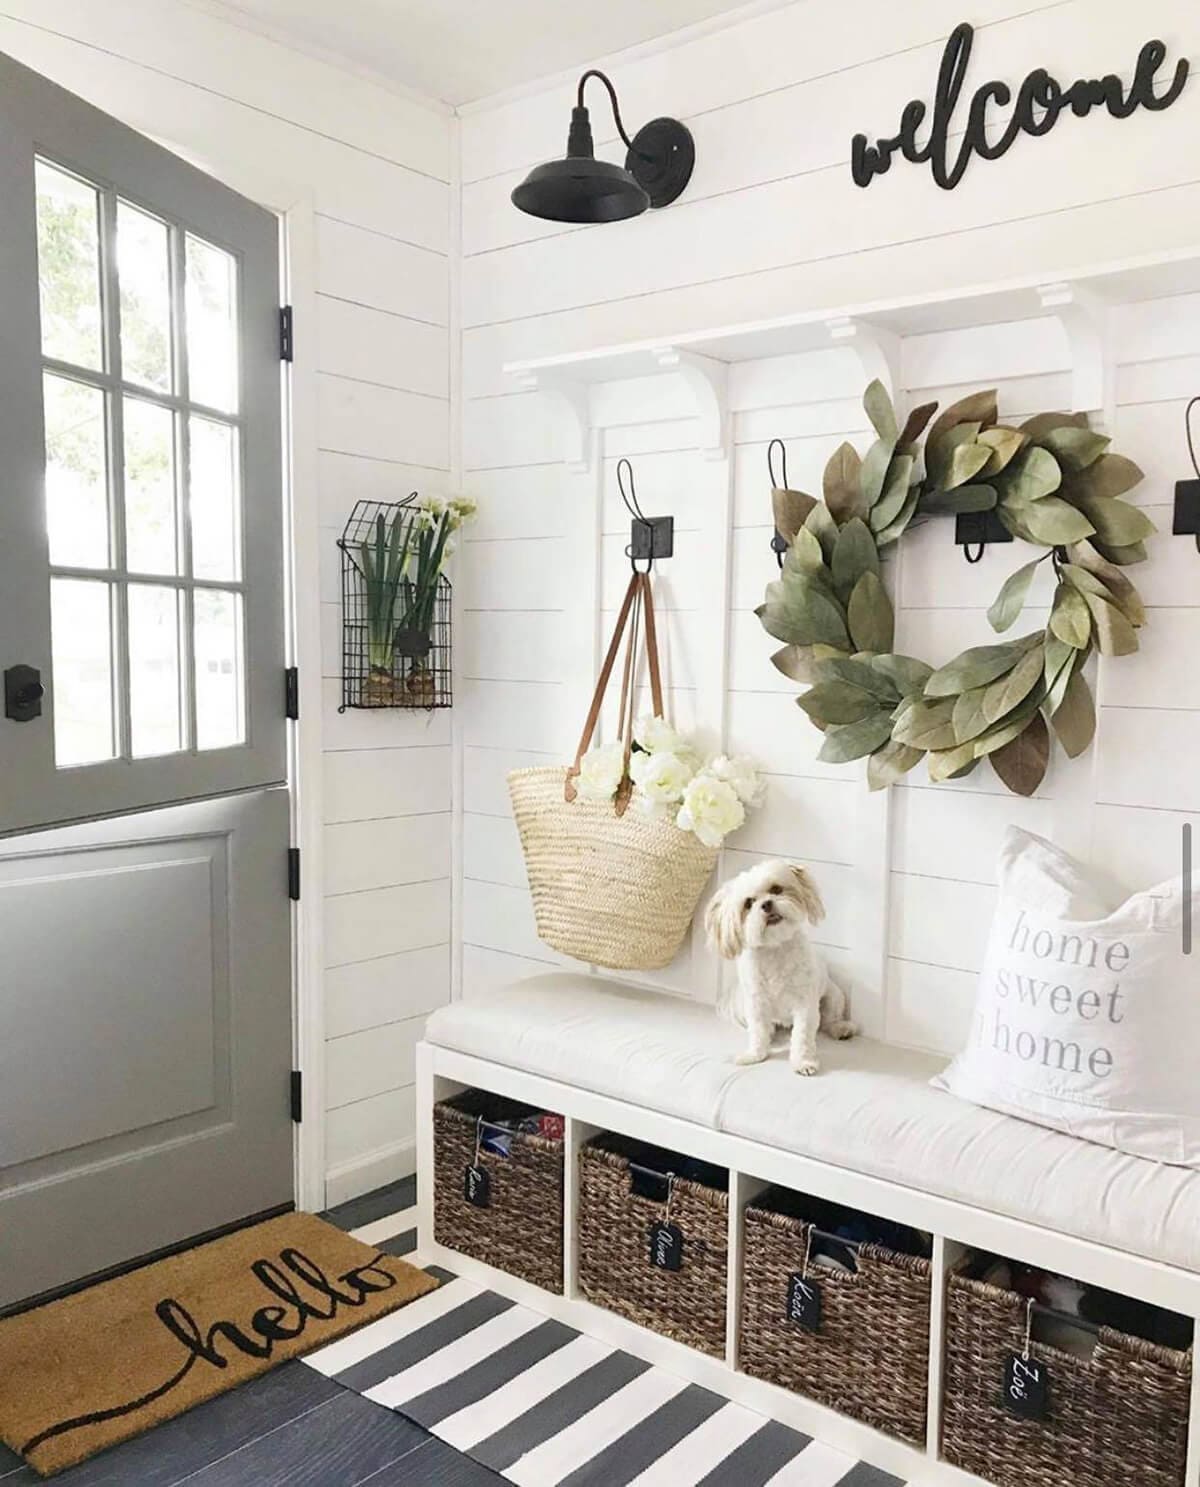 Rustic entryway decorating ideas to welcome your guests - 67